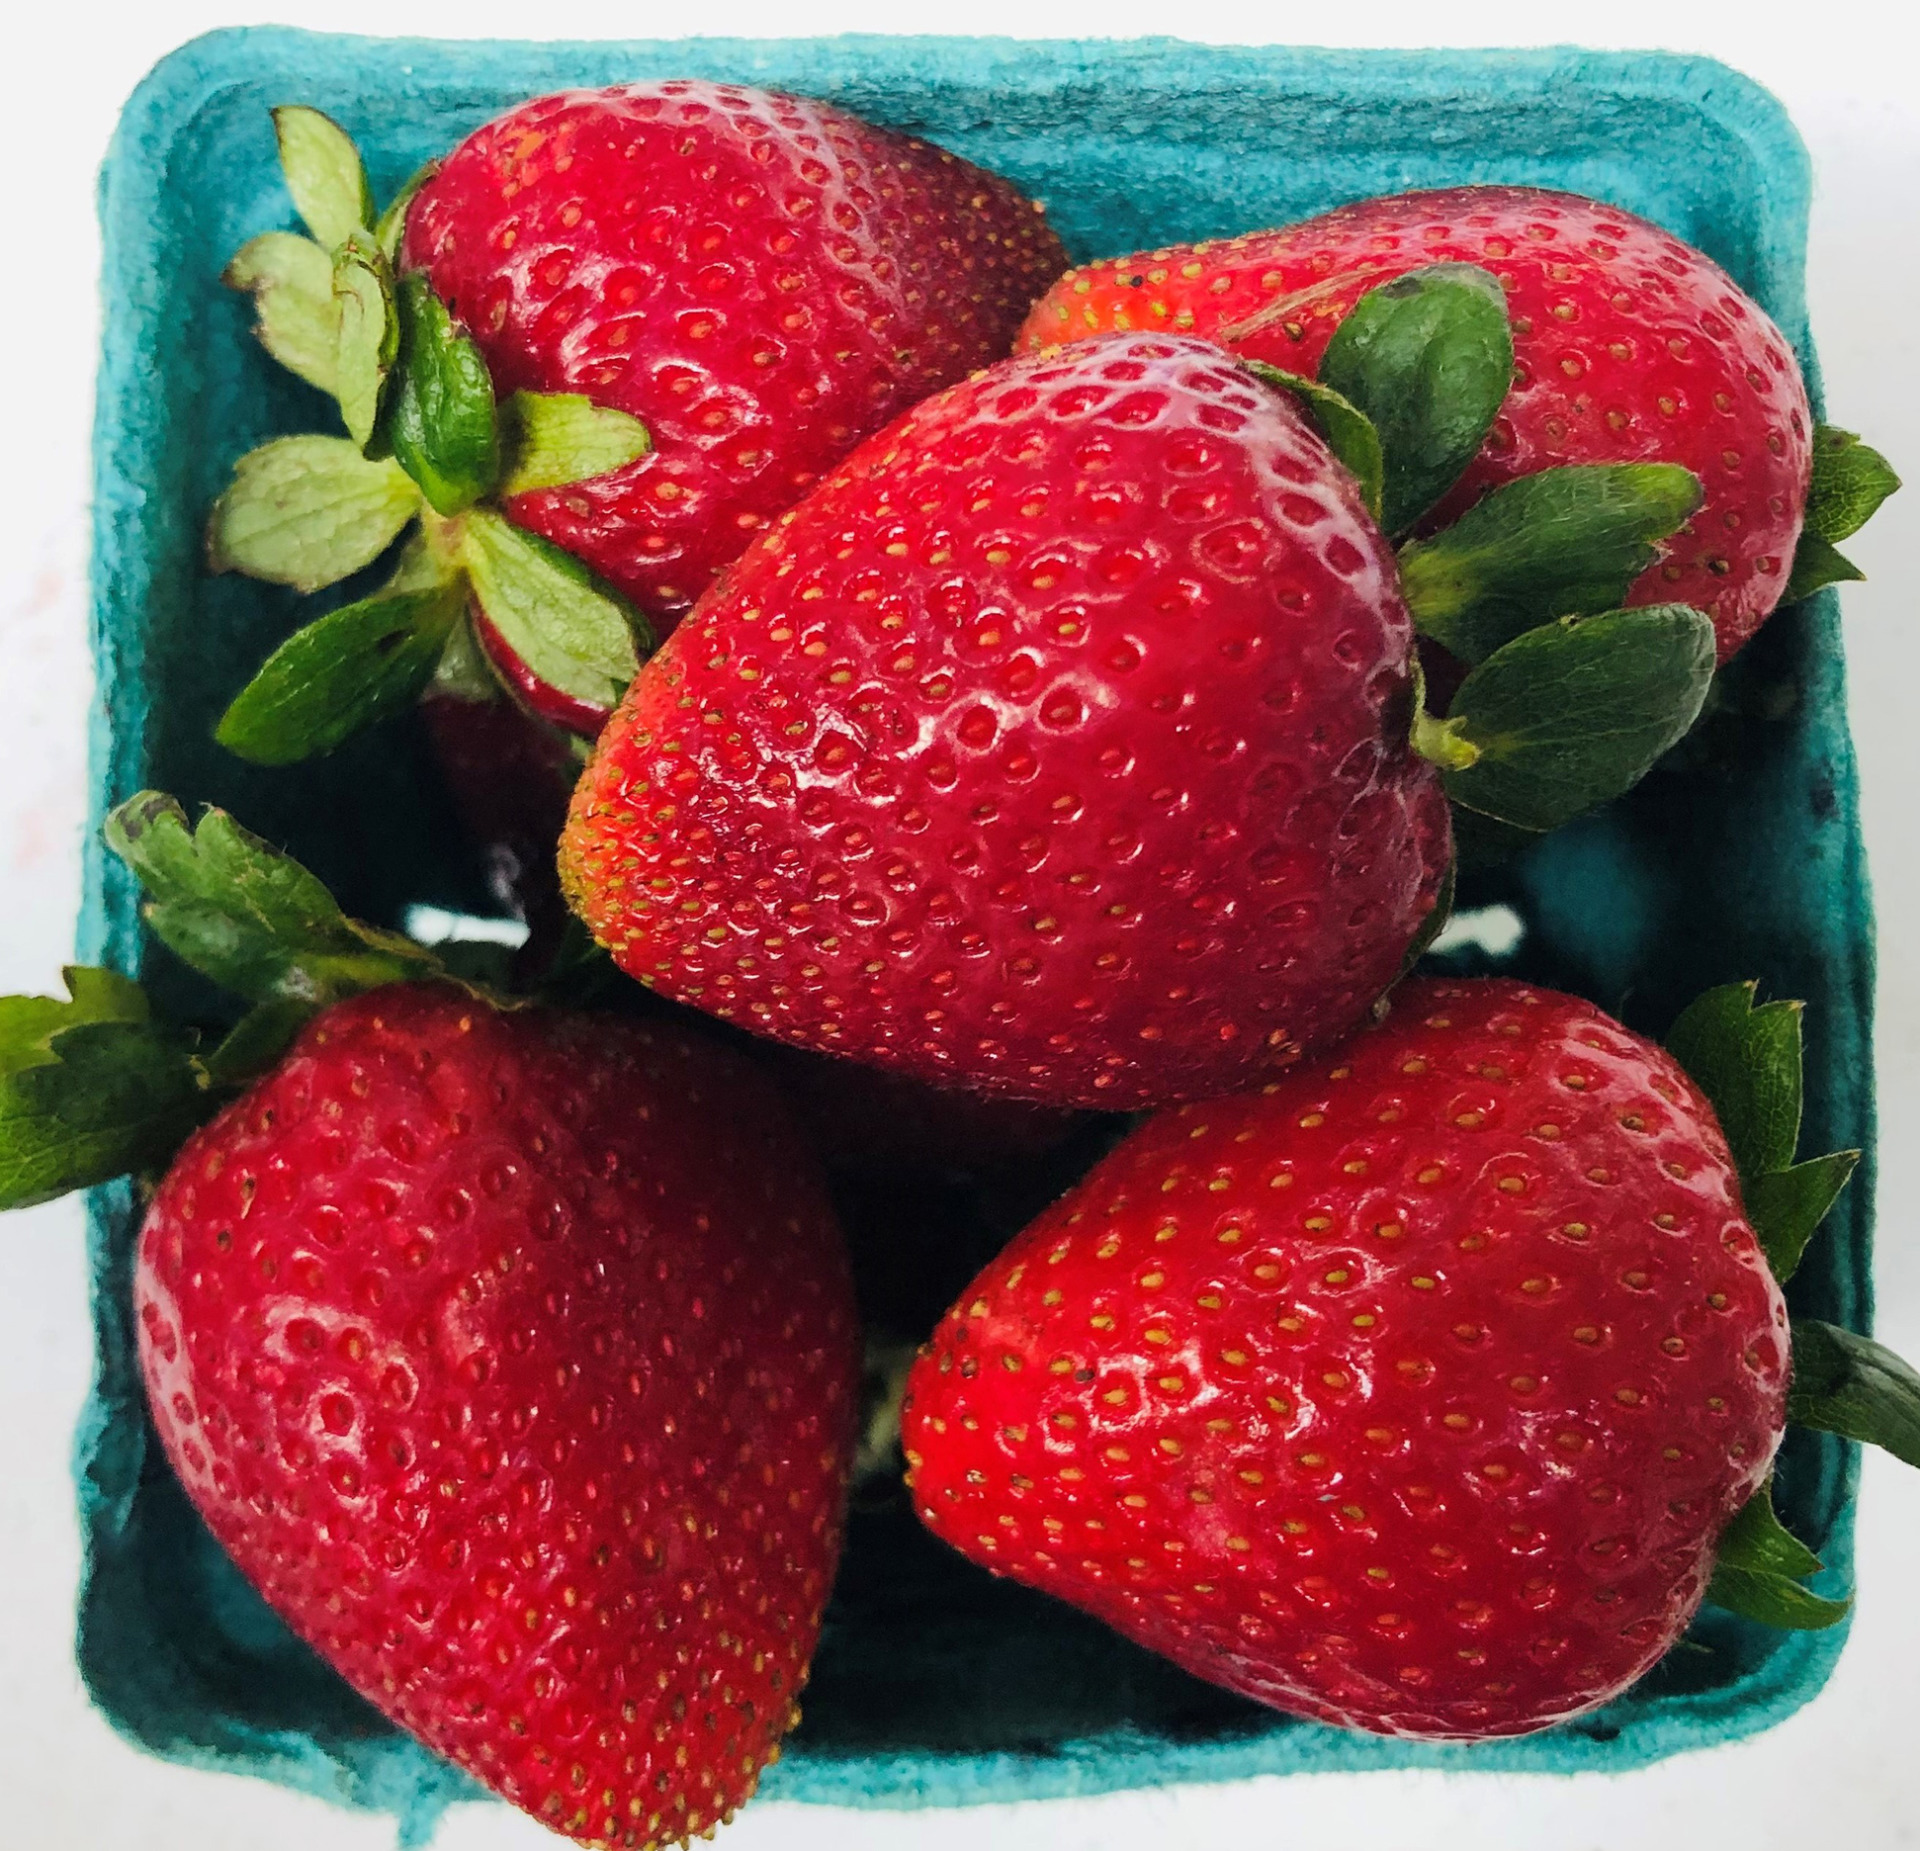 Getting the most from your strawberry plants